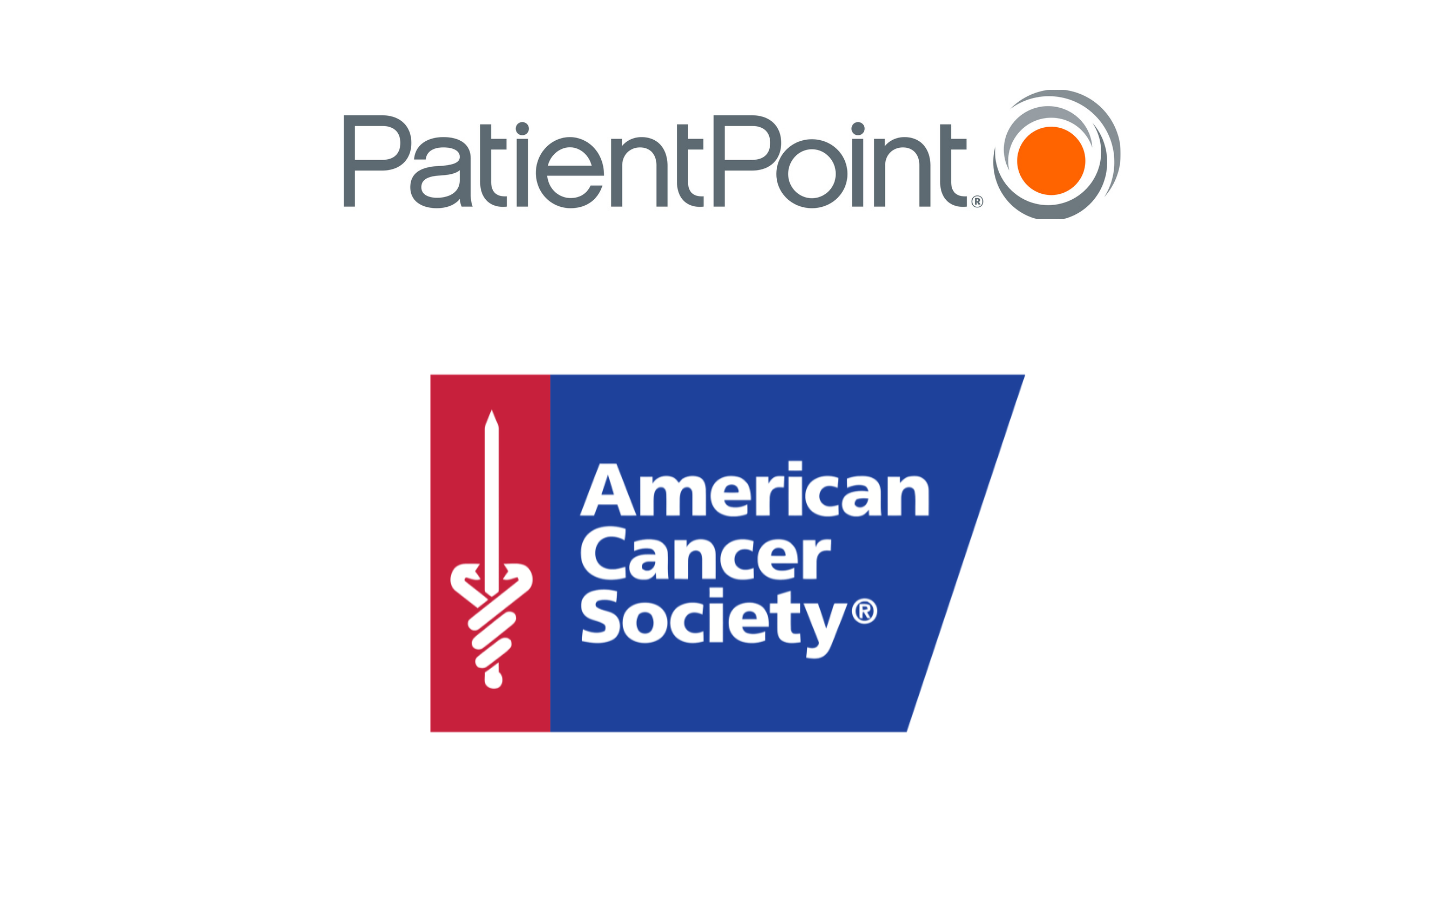 PatientPoint and American Cancer Society logos